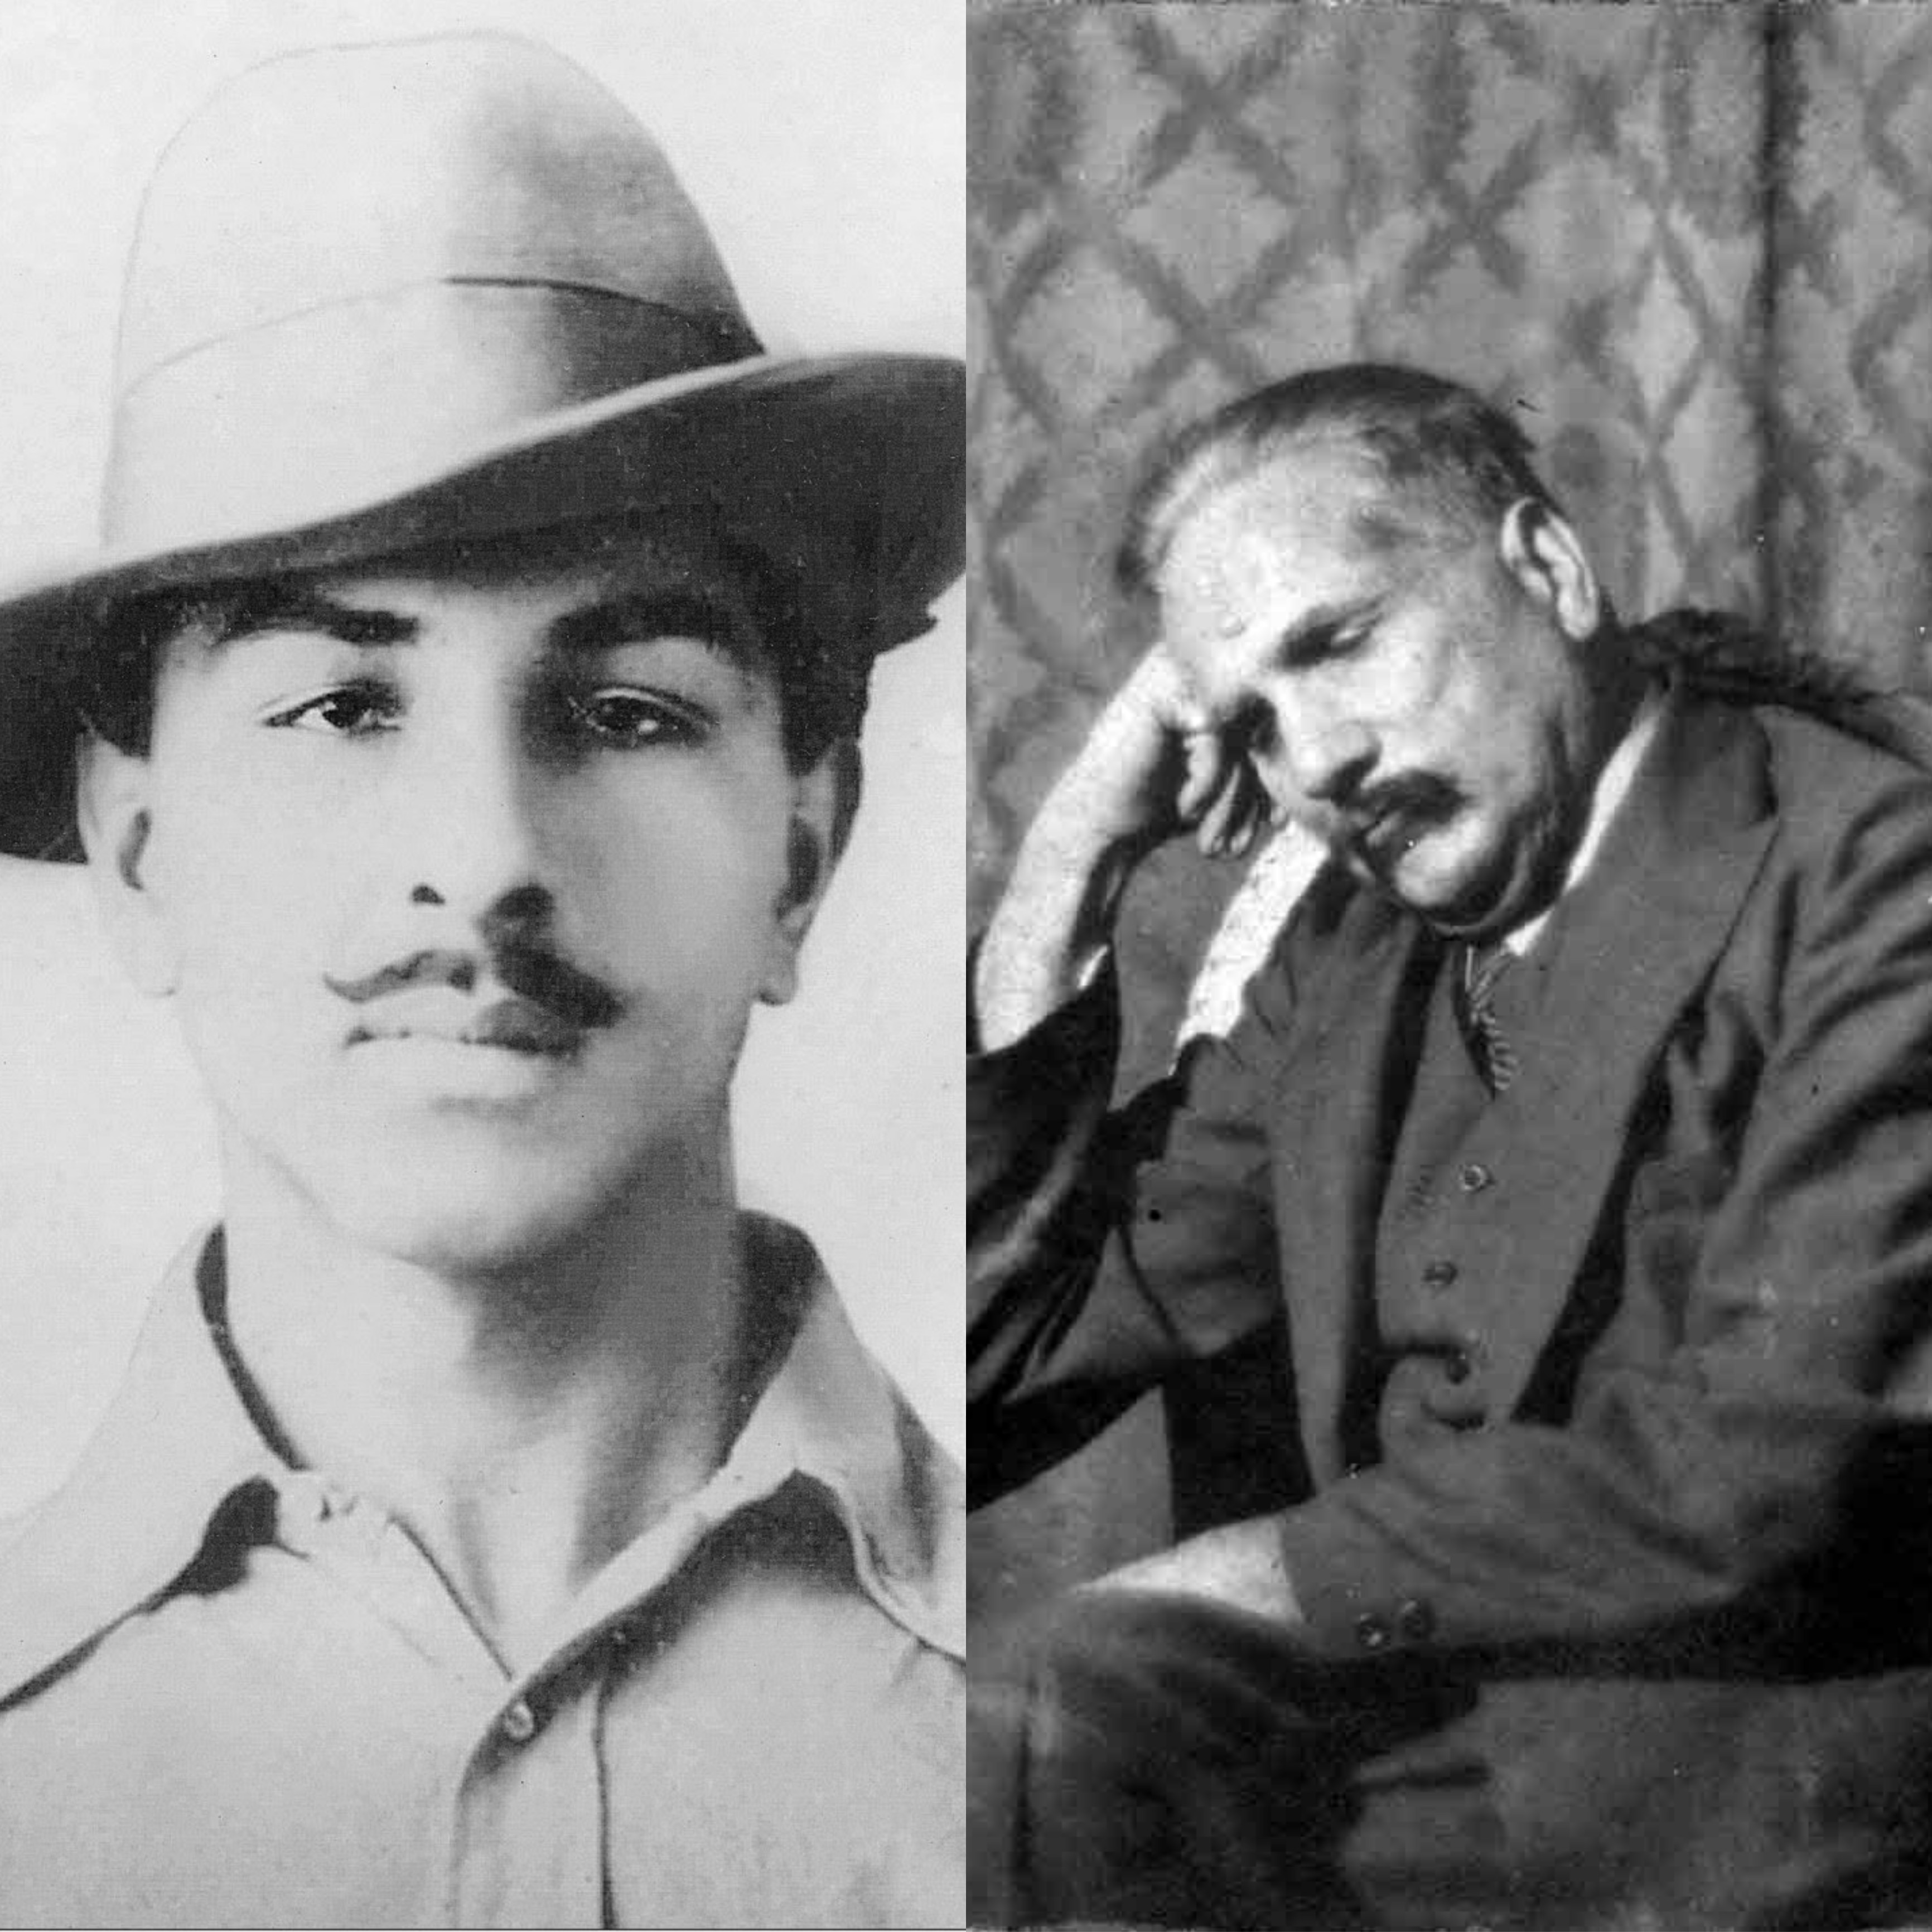 When Allama Iqbal stood up for Bhagat Singh